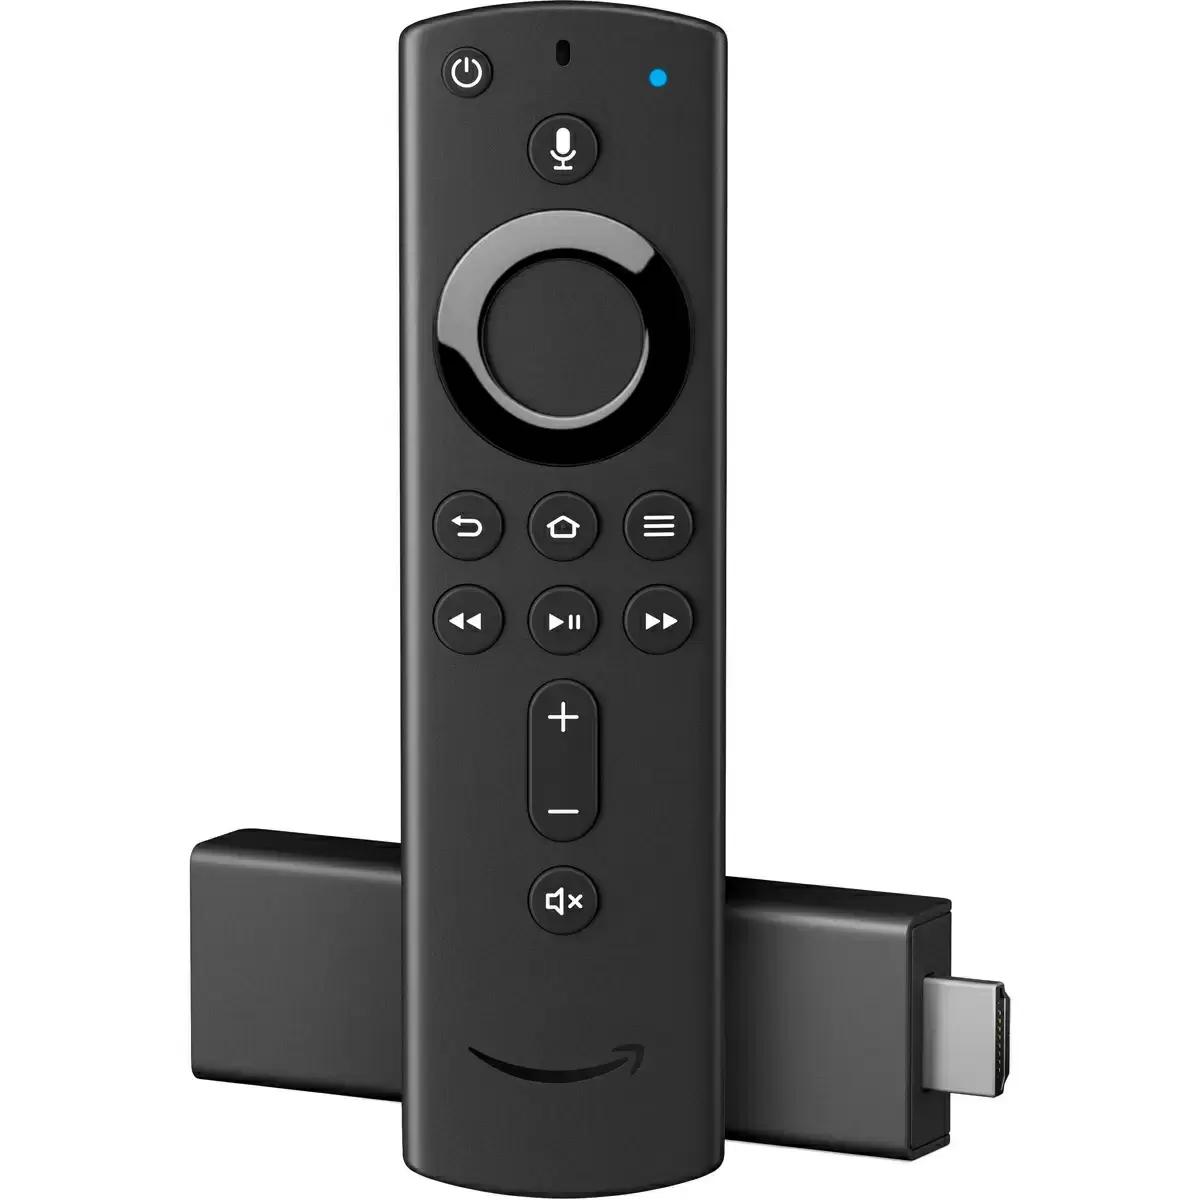 Amazon Fire TV Stick 4K Streaming Media Player for $24.99 Shipped